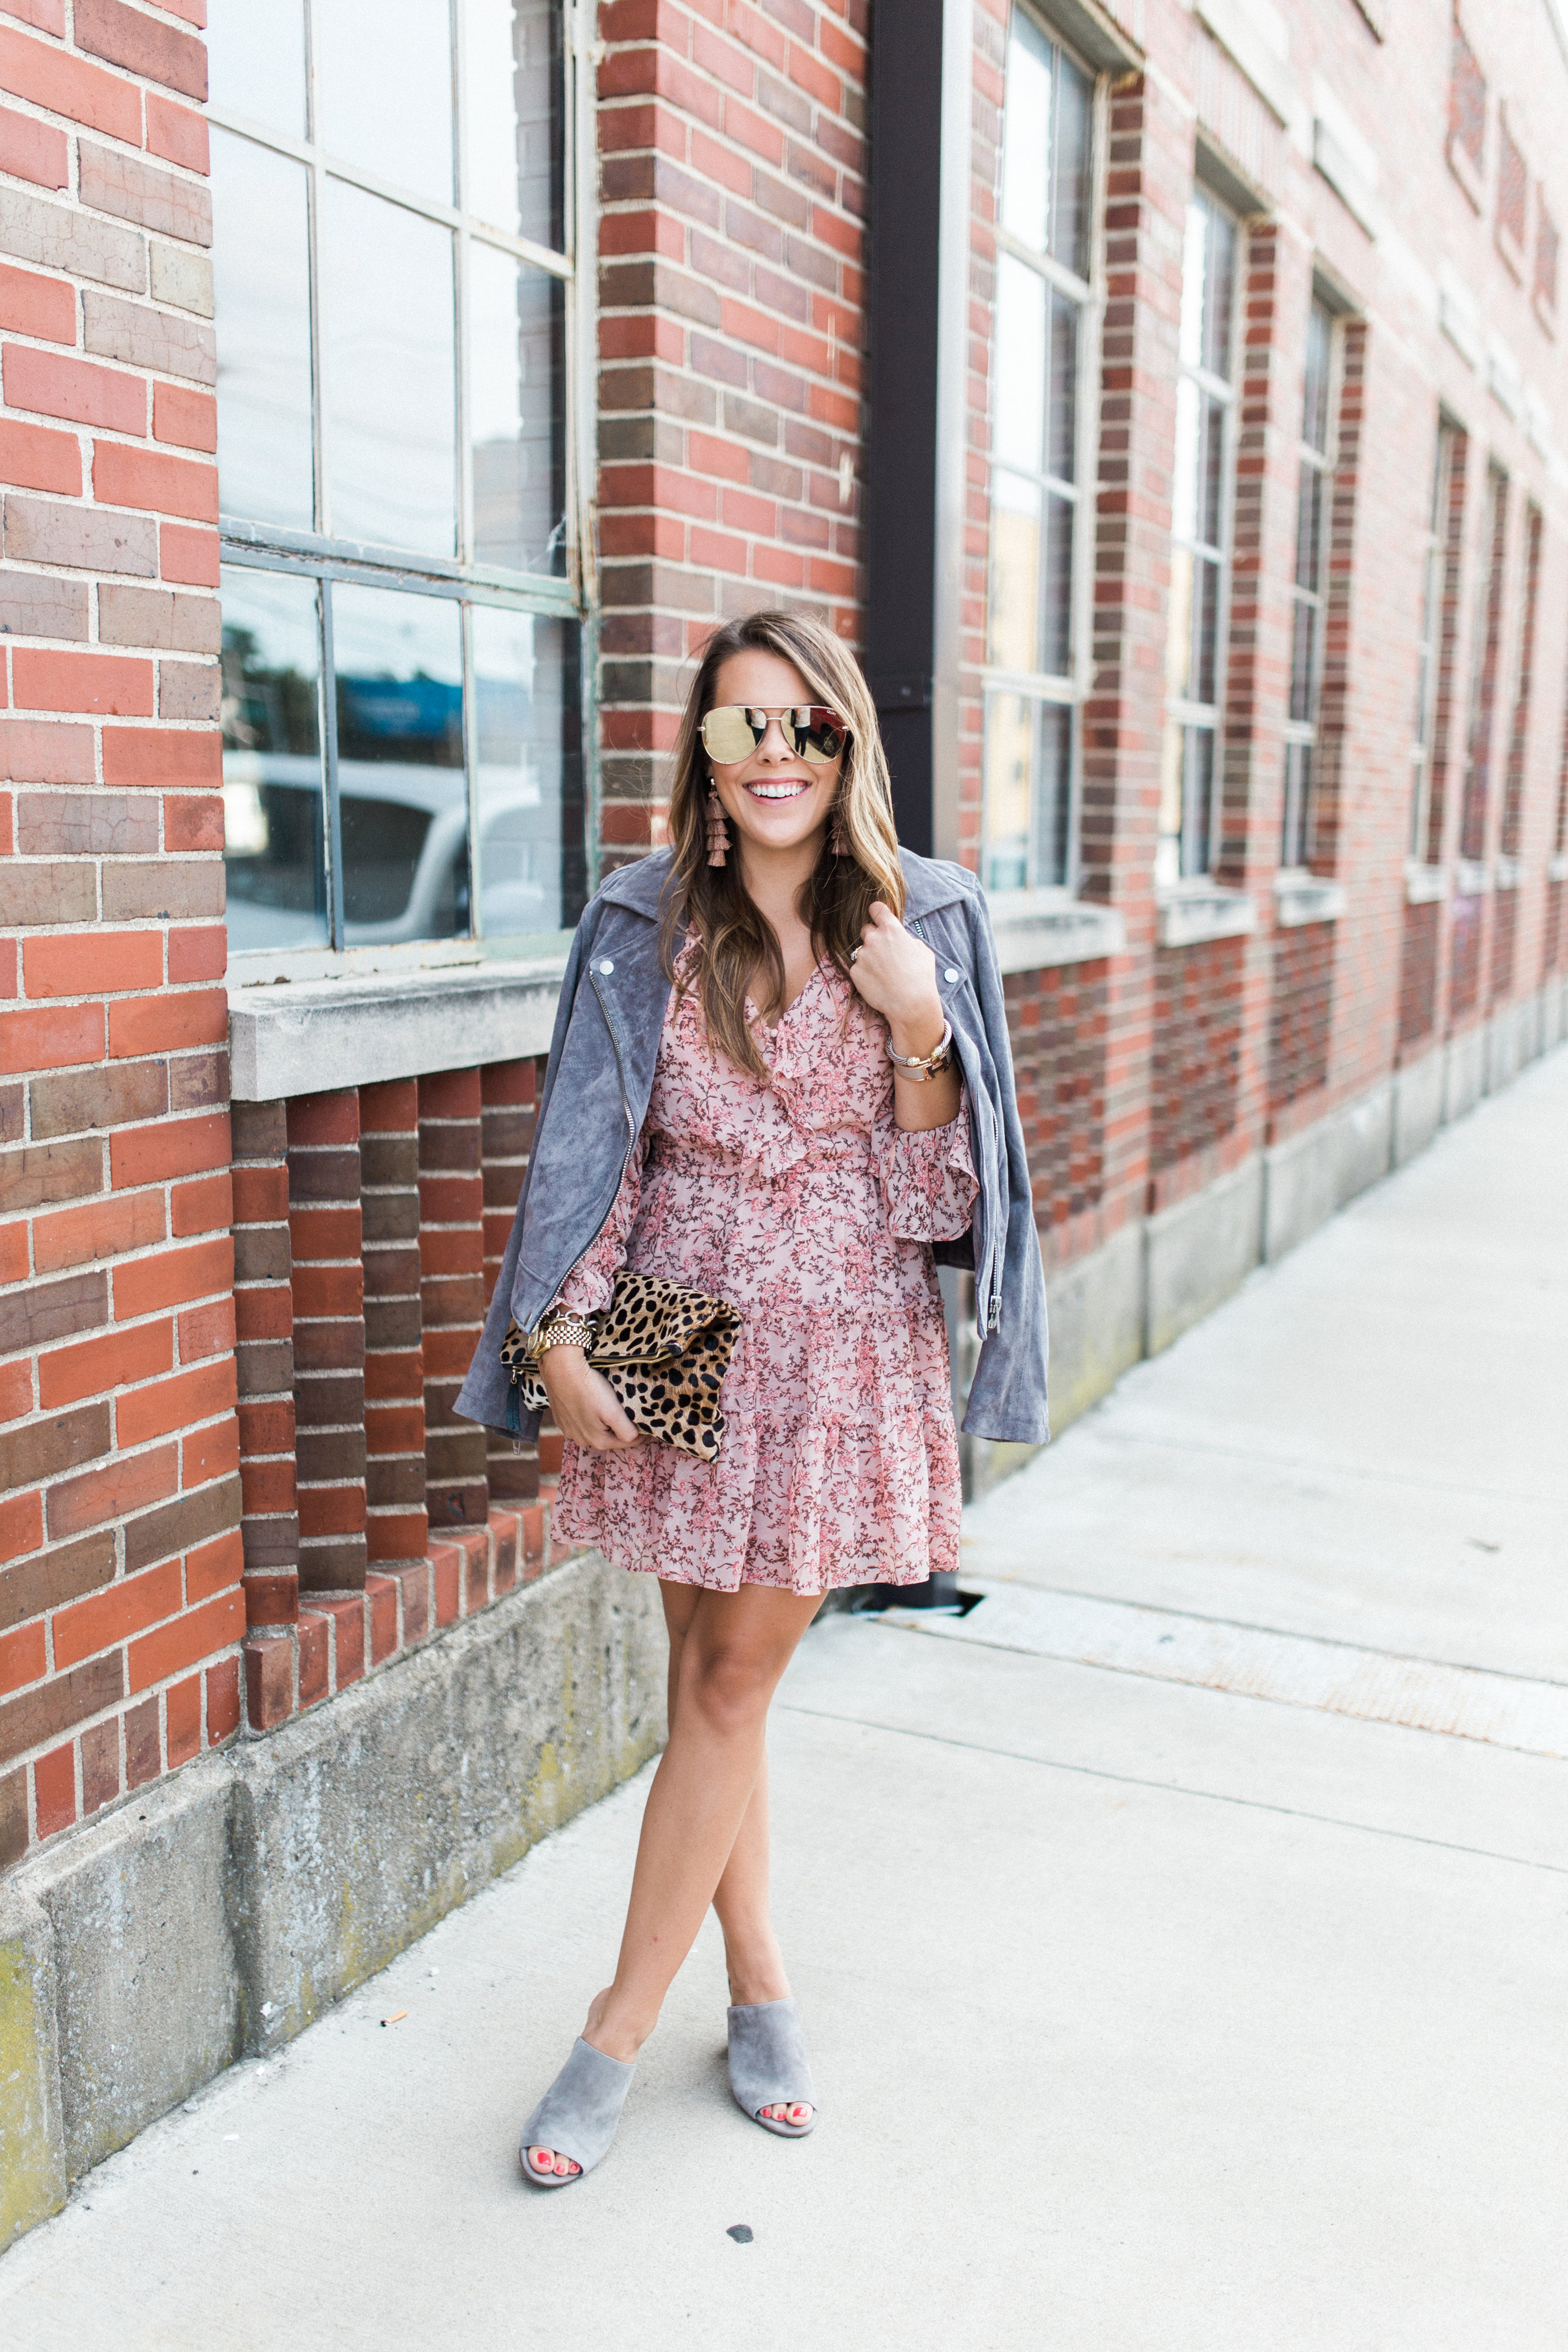 Fall Floral Dress / Suede Jacket / How to wear mules